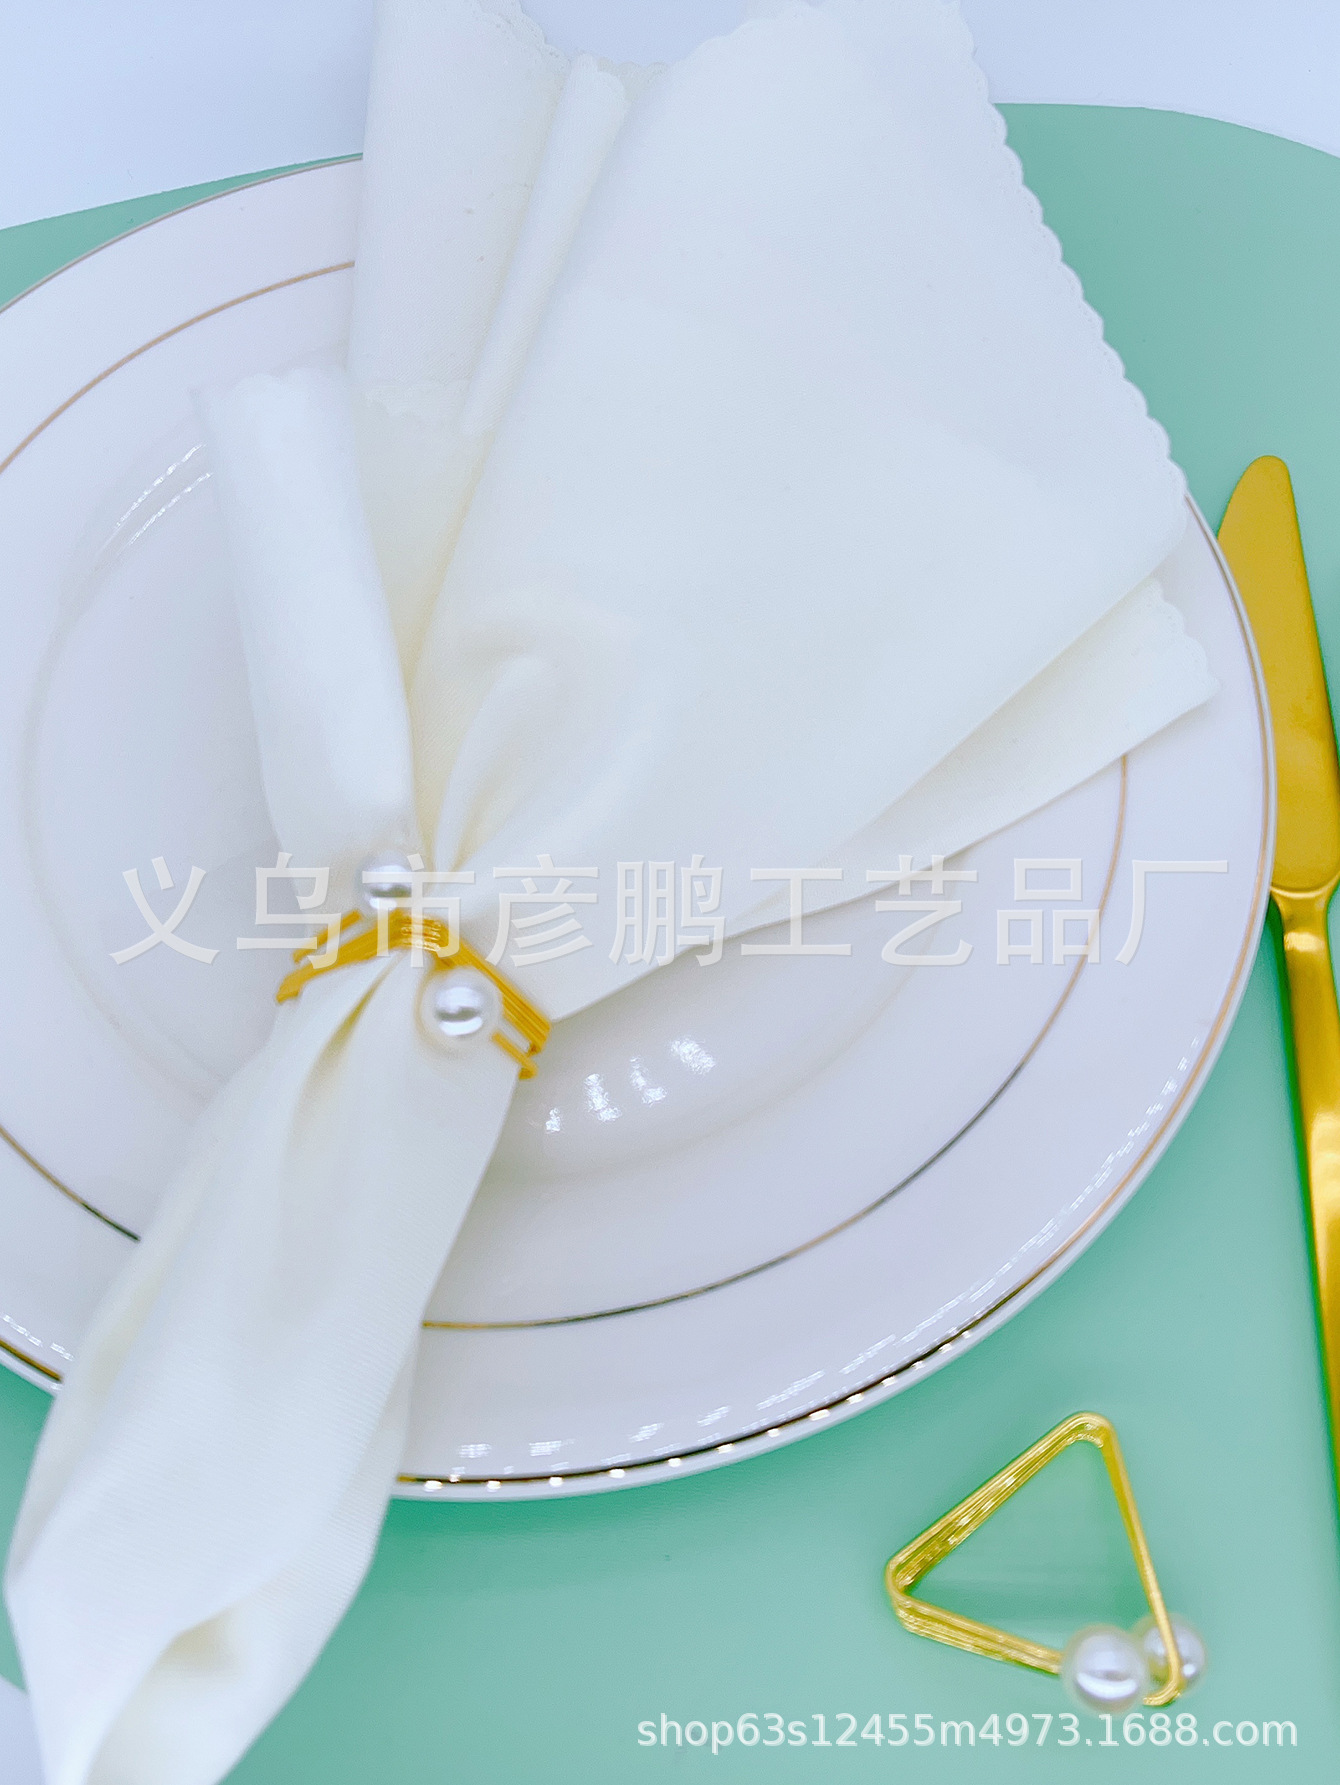 For Cross-Border Hot Selling Geometric Pearl Napkin Ring Hotel Dining-Table Decoration Napkin Ring Wedding Exquisite Napkin Ring Wholesale